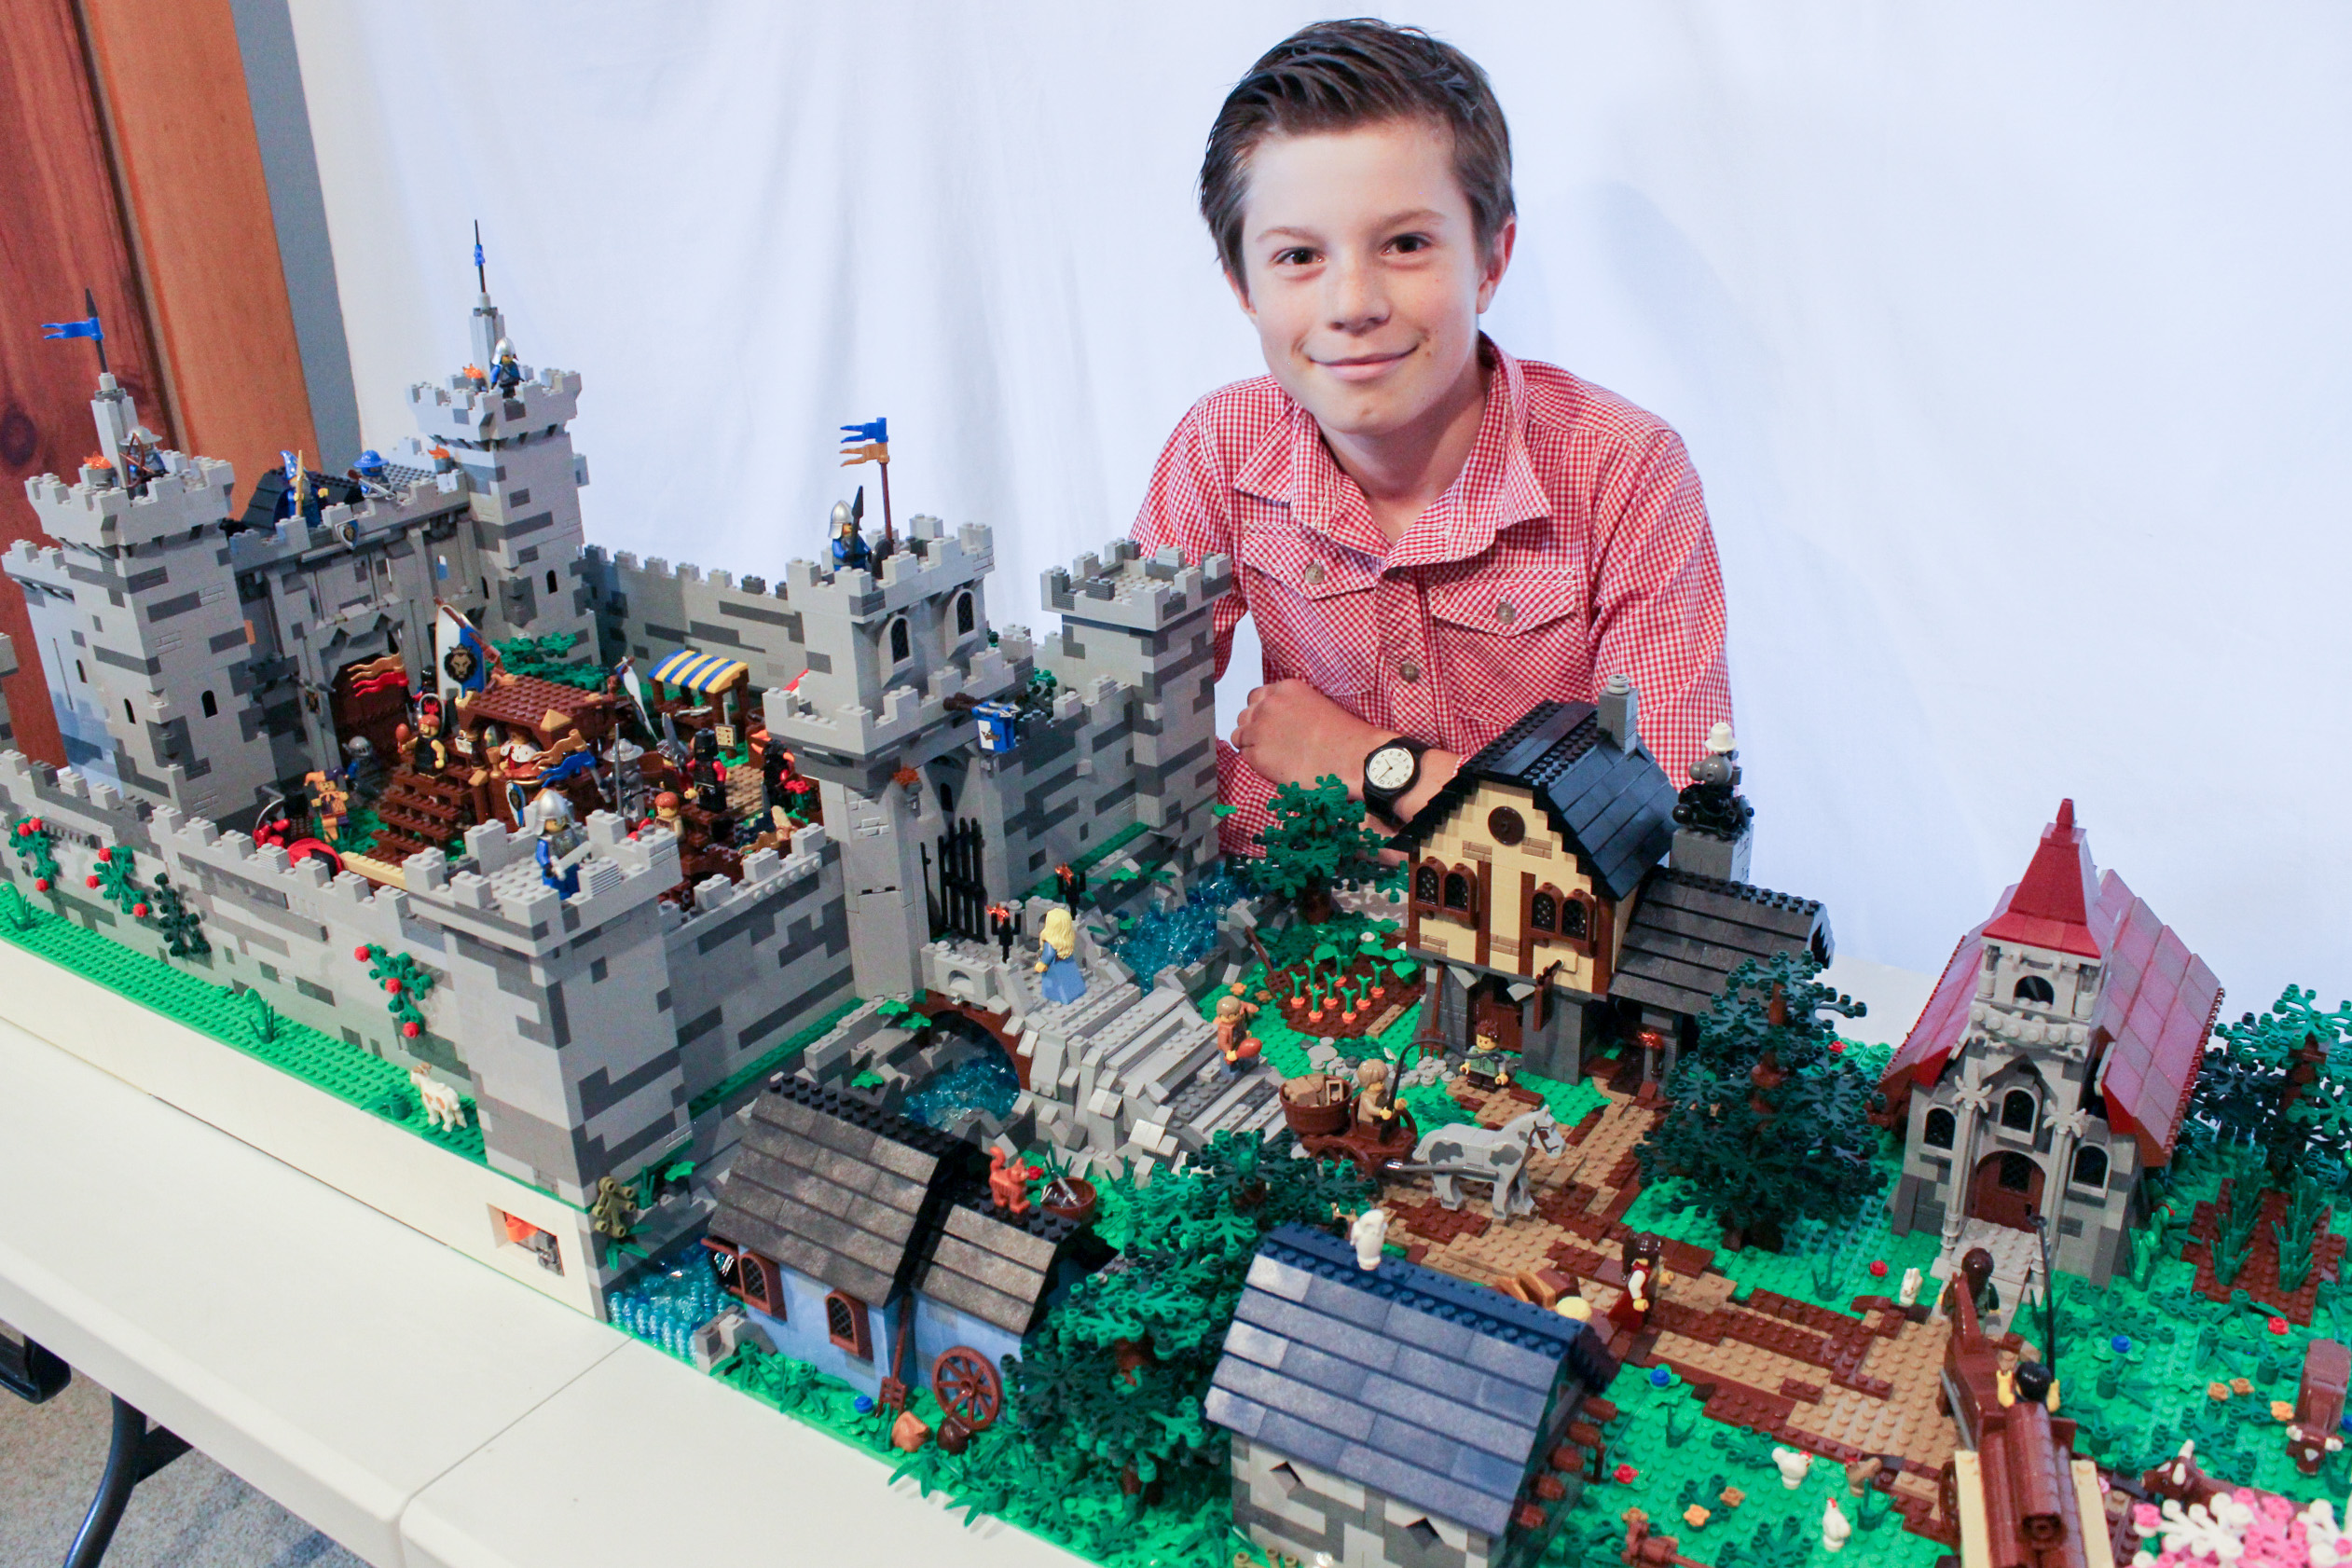 miles indre last Interview: Award-winning young LEGO builder Matthew Eagles - BRICK ARCHITECT